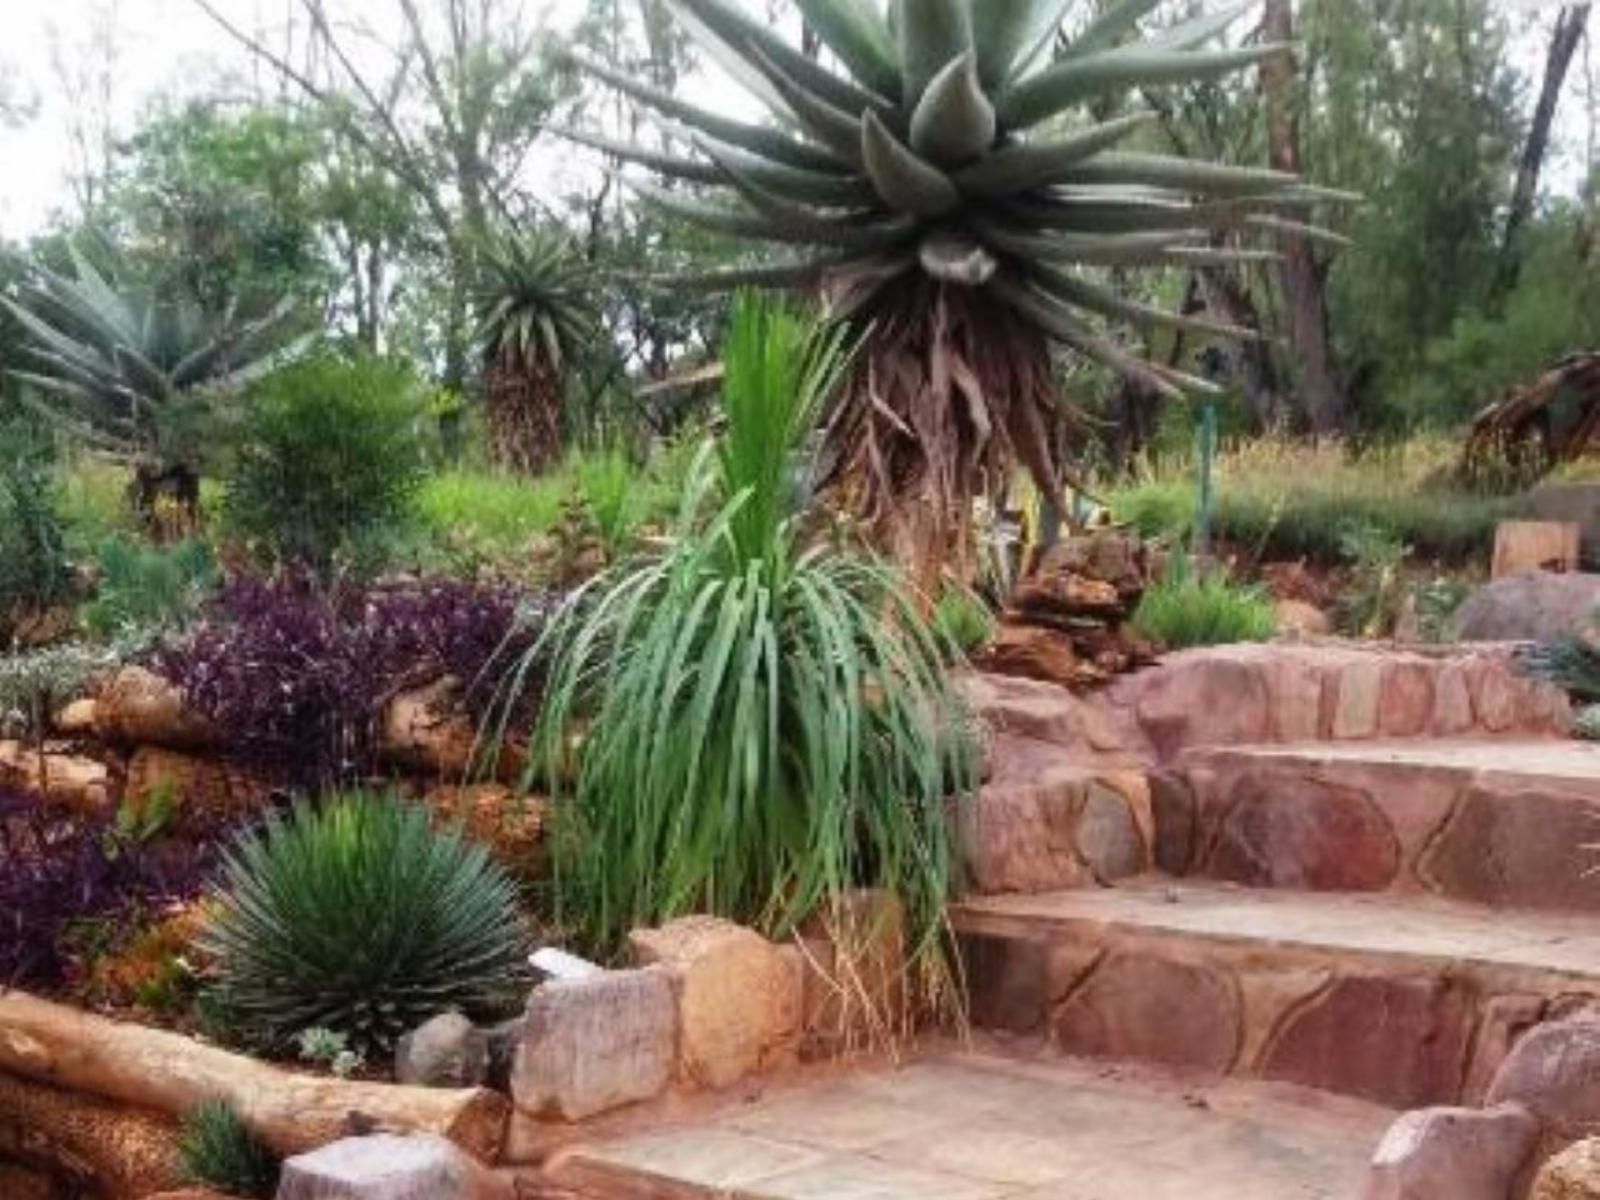 Hadida Guesthouse Swartruggens North West Province South Africa Plant, Nature, Garden